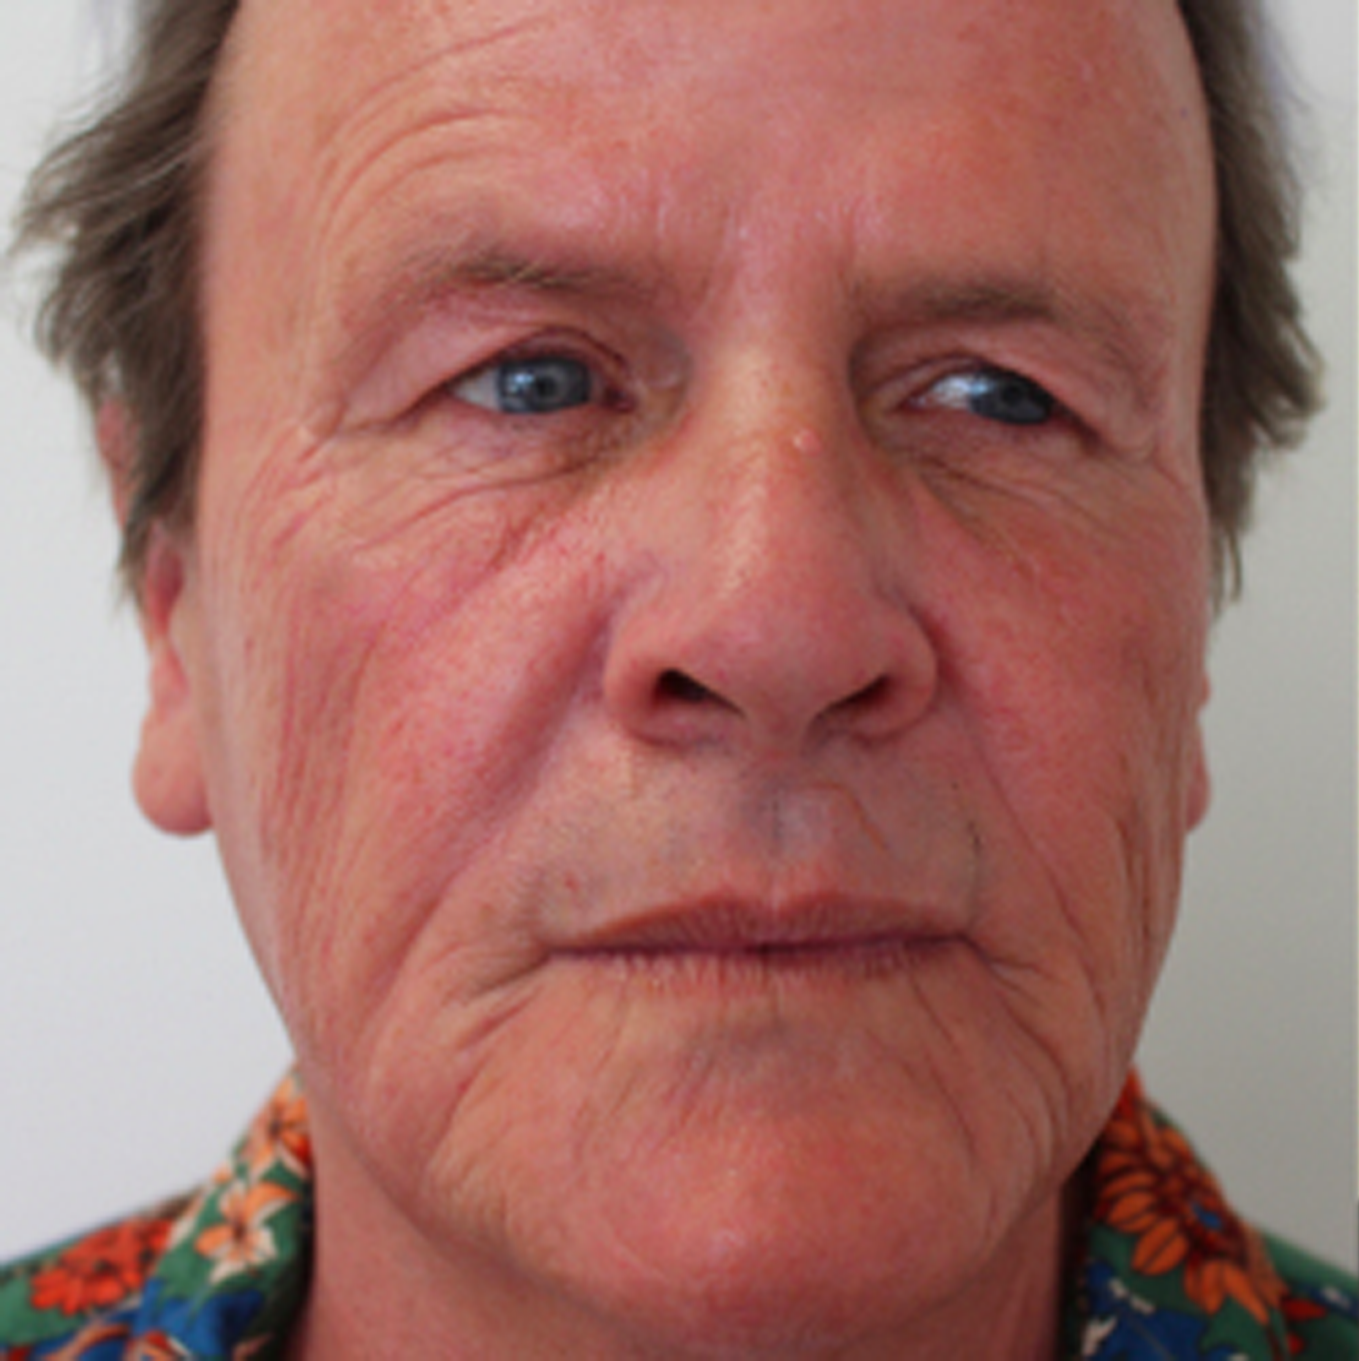 A close up of a man 's face with a floral shirt on